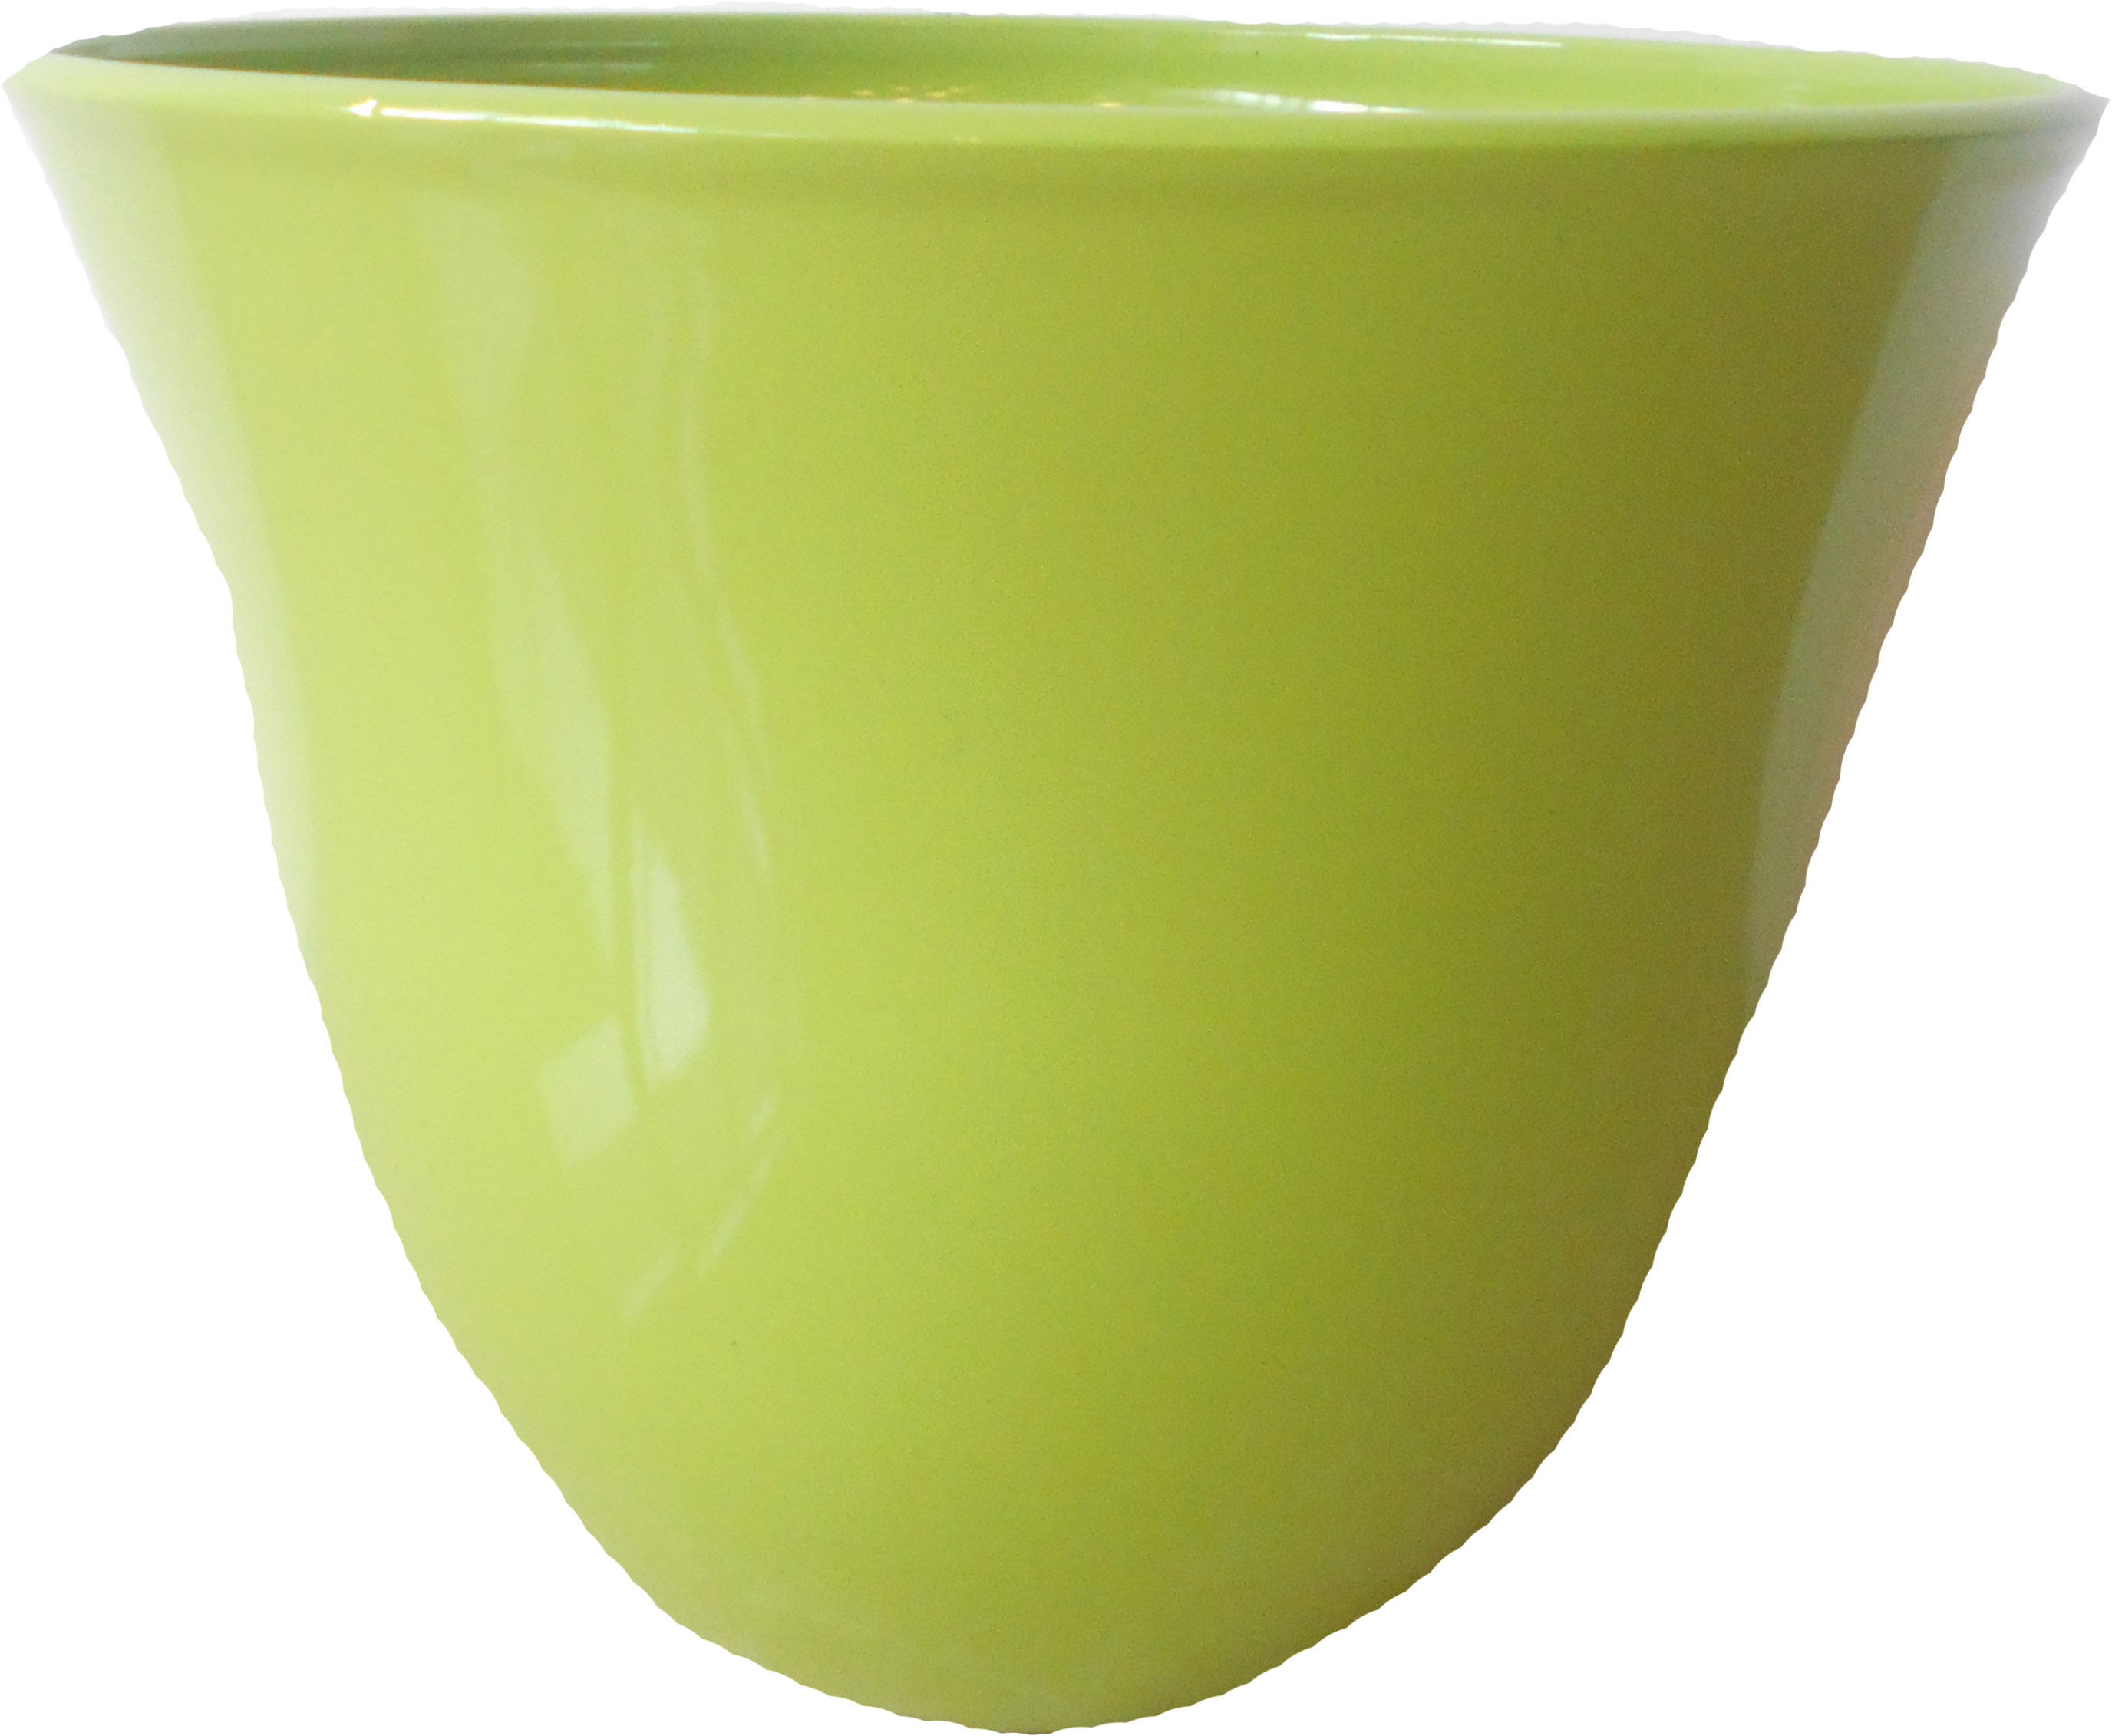 13” x 10.5” Baby Bell Planter Lime Green Gloss - 12 per case